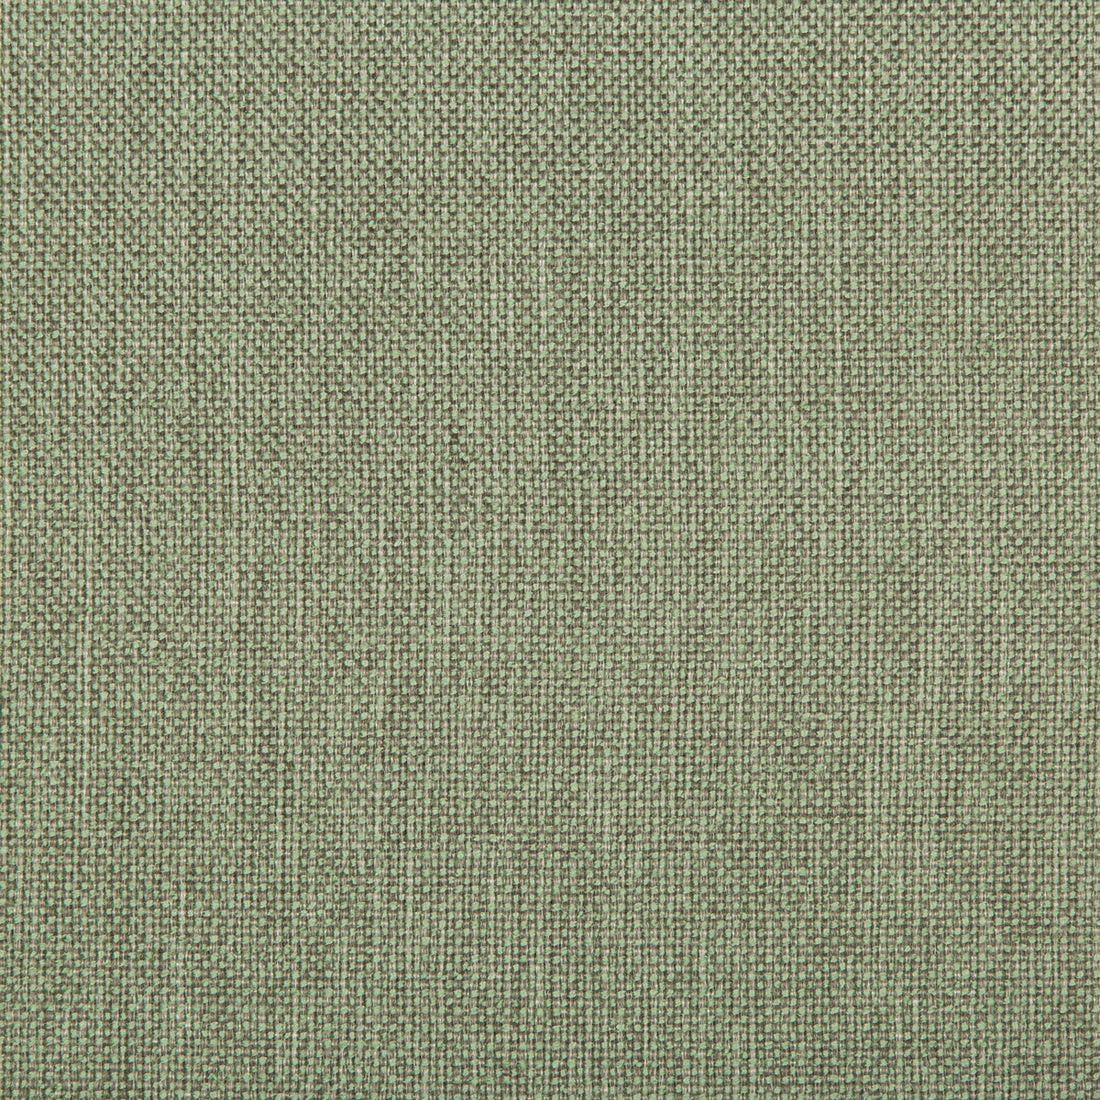 Williams fabric in spearmint color - pattern 35744.23.0 - by Kravet Contract in the Value Kravetarmor collection